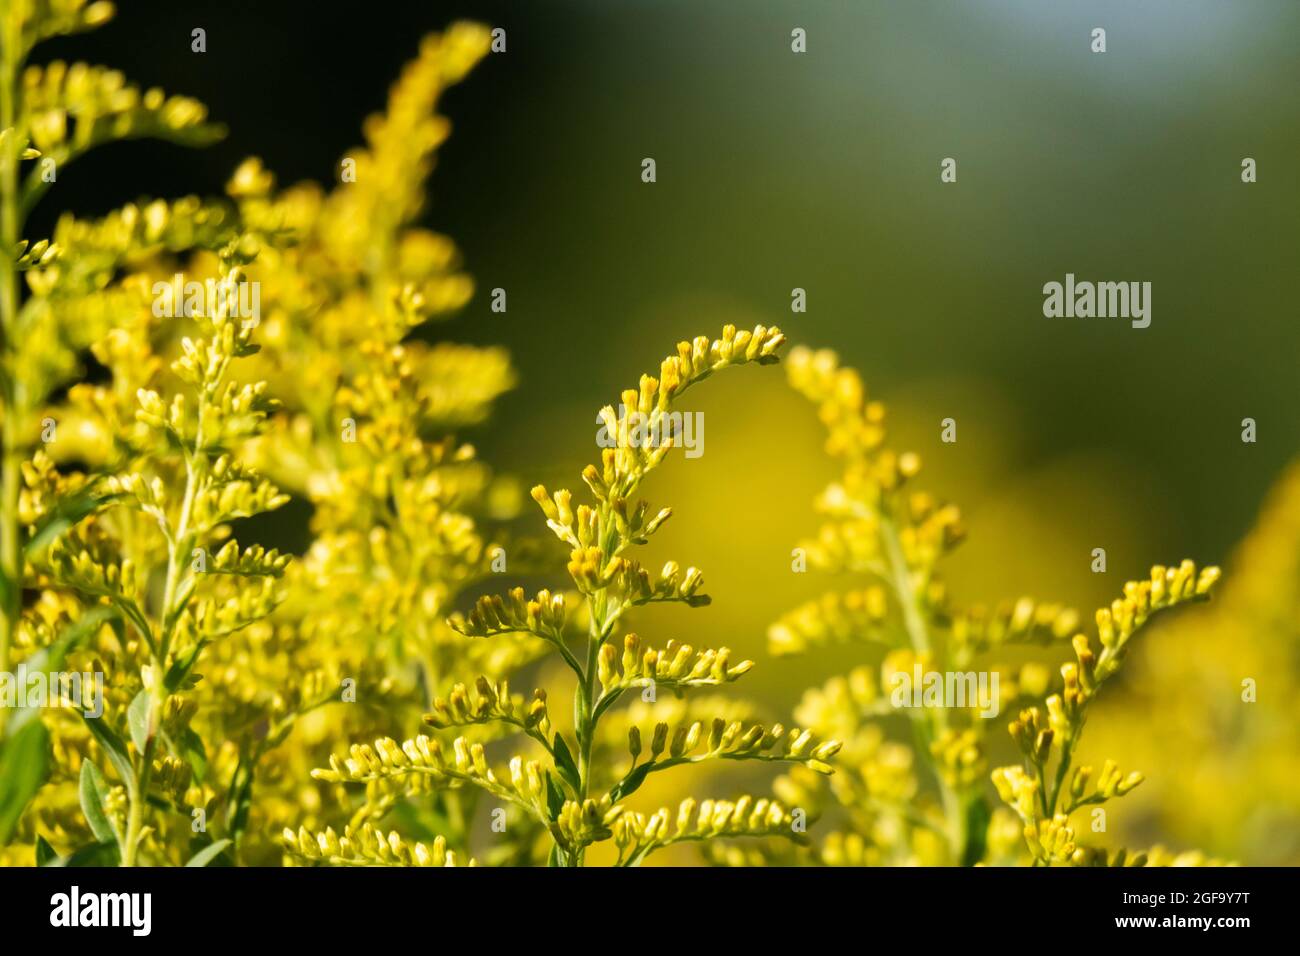 Close up view of the tips of golden rod fading into a darker background. Stock Photo